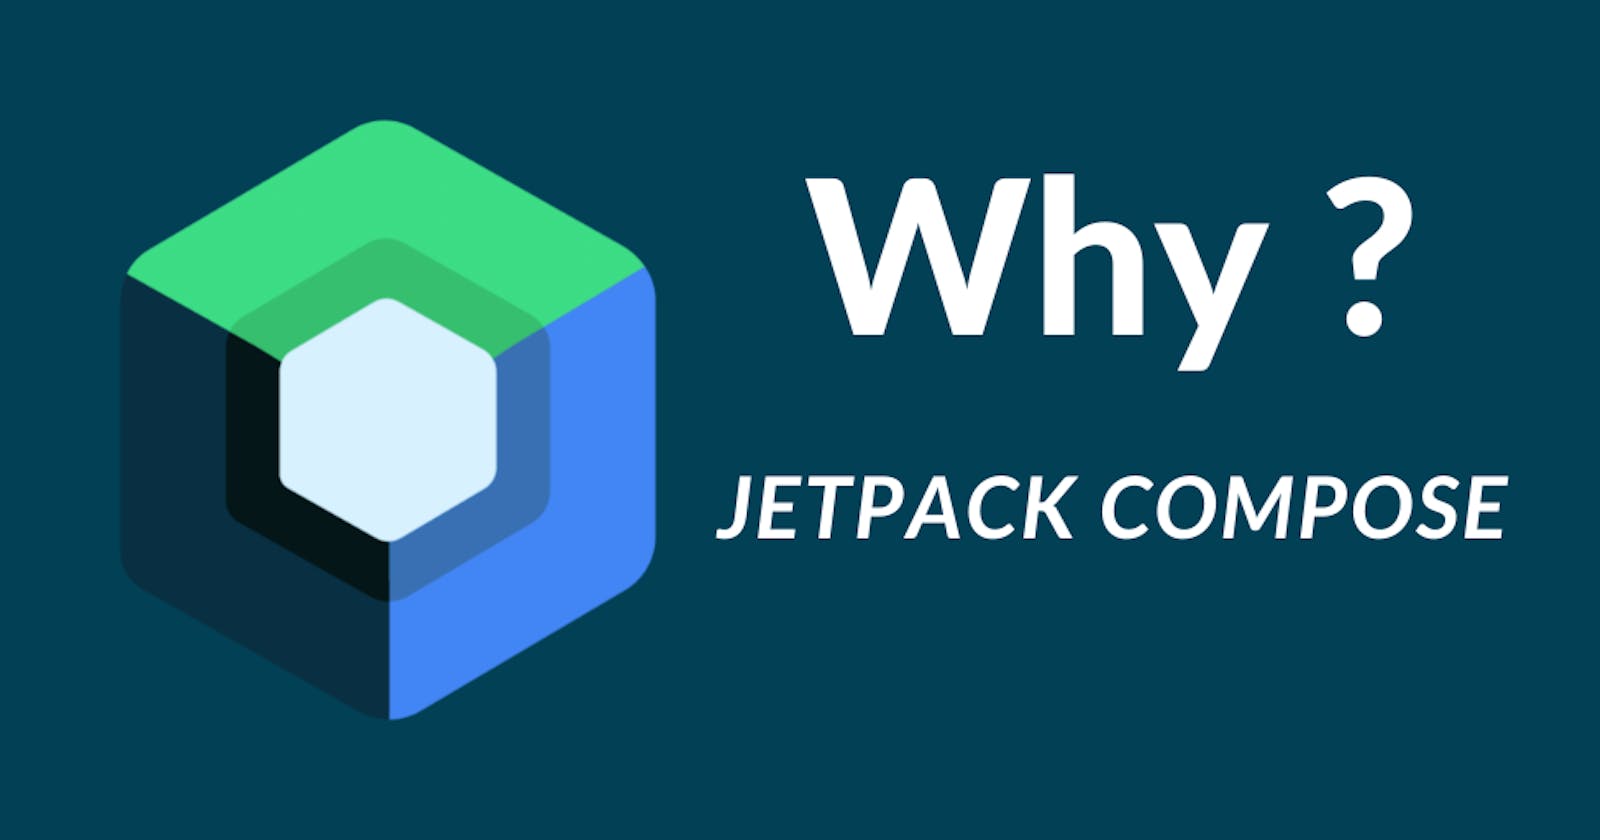 Why choose jetpack compose?